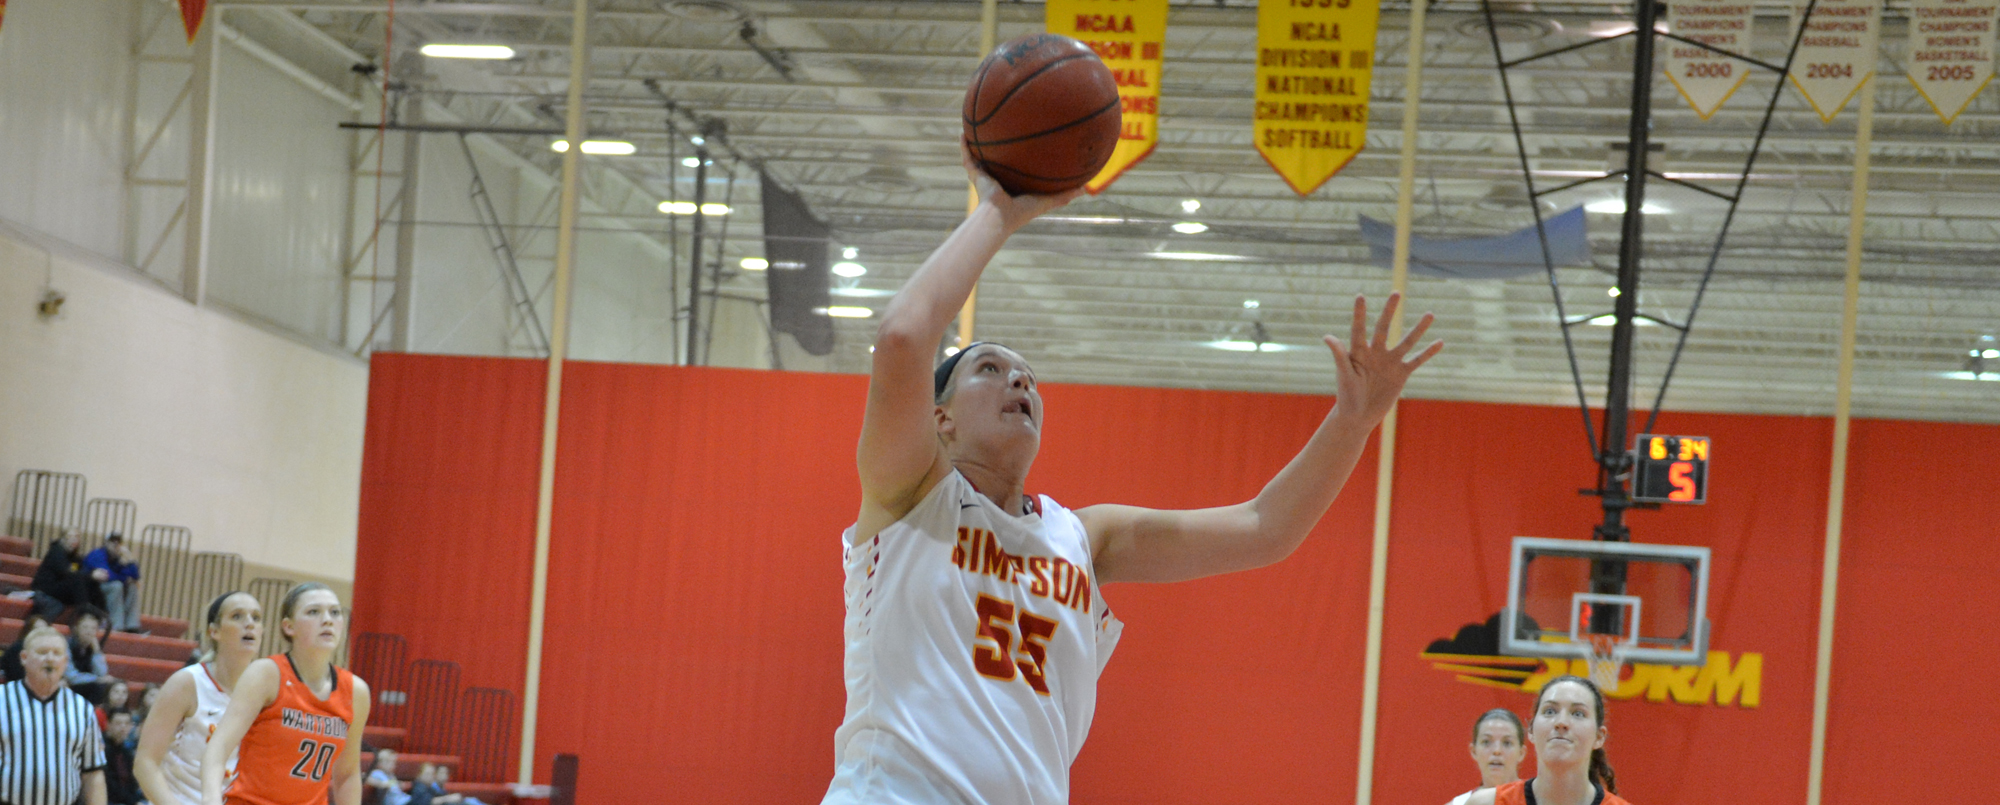 Noreen Morrow scored a game-high 23 points in Simpson's loss at Loras on Saturday.